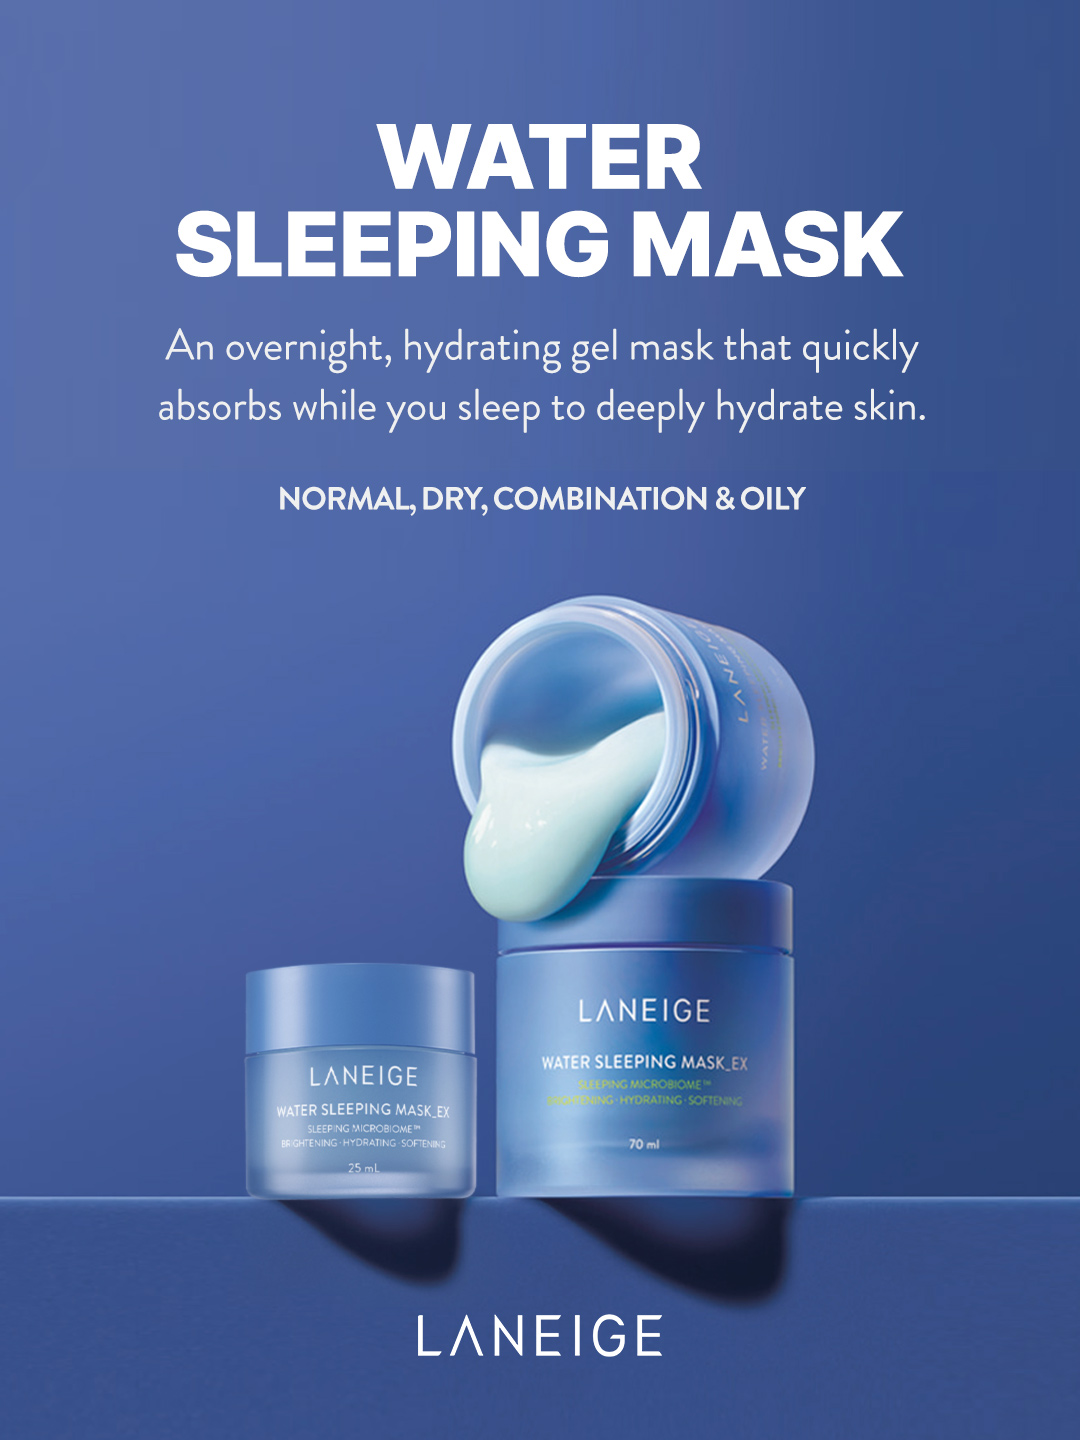 LANEIGE Water Sleeping Mask page one.